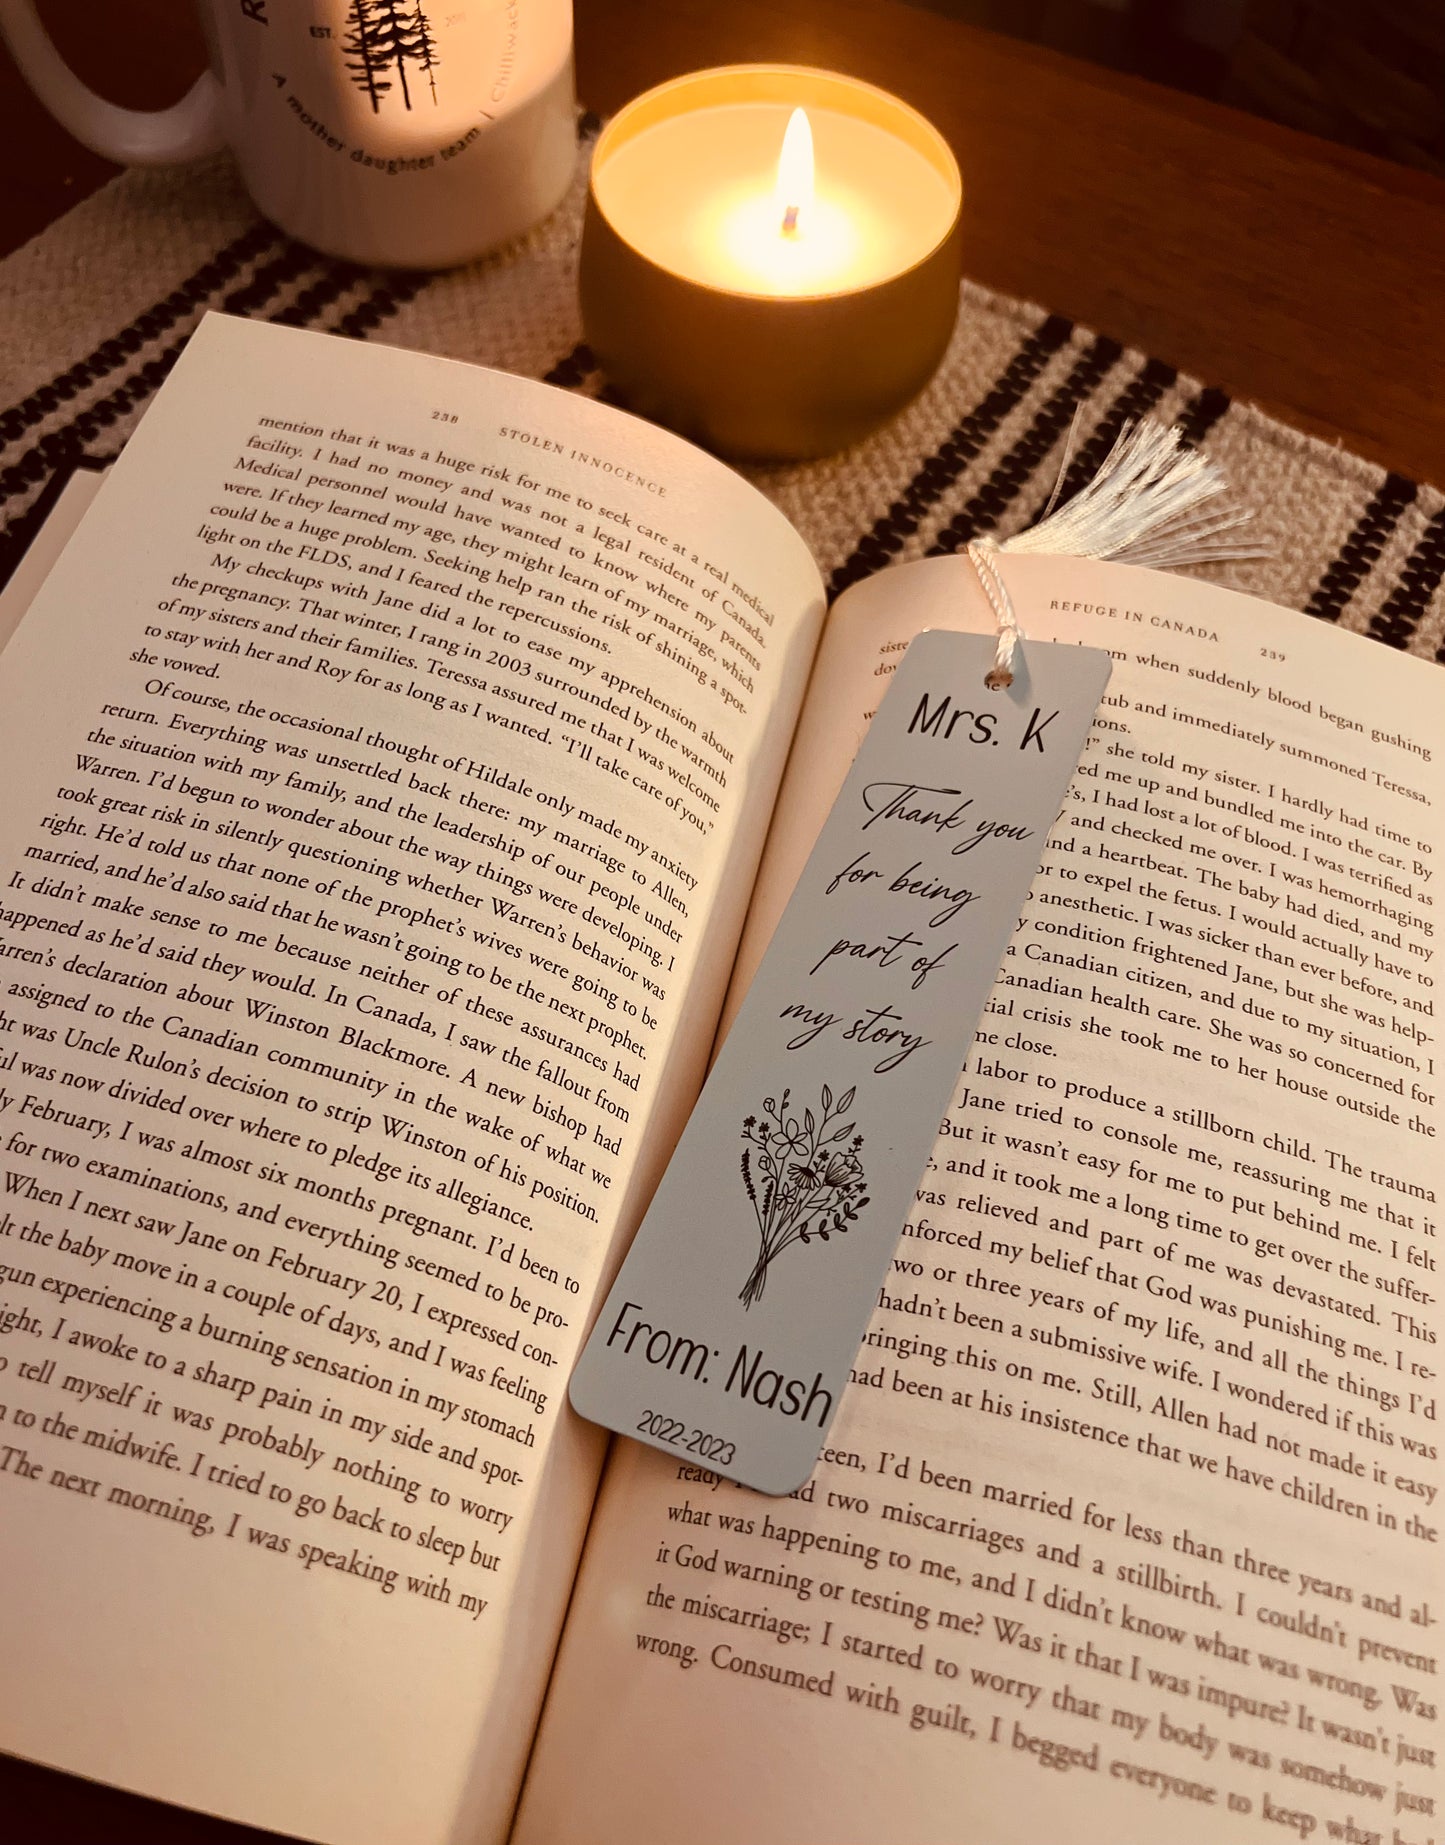 Part of my story bookmark